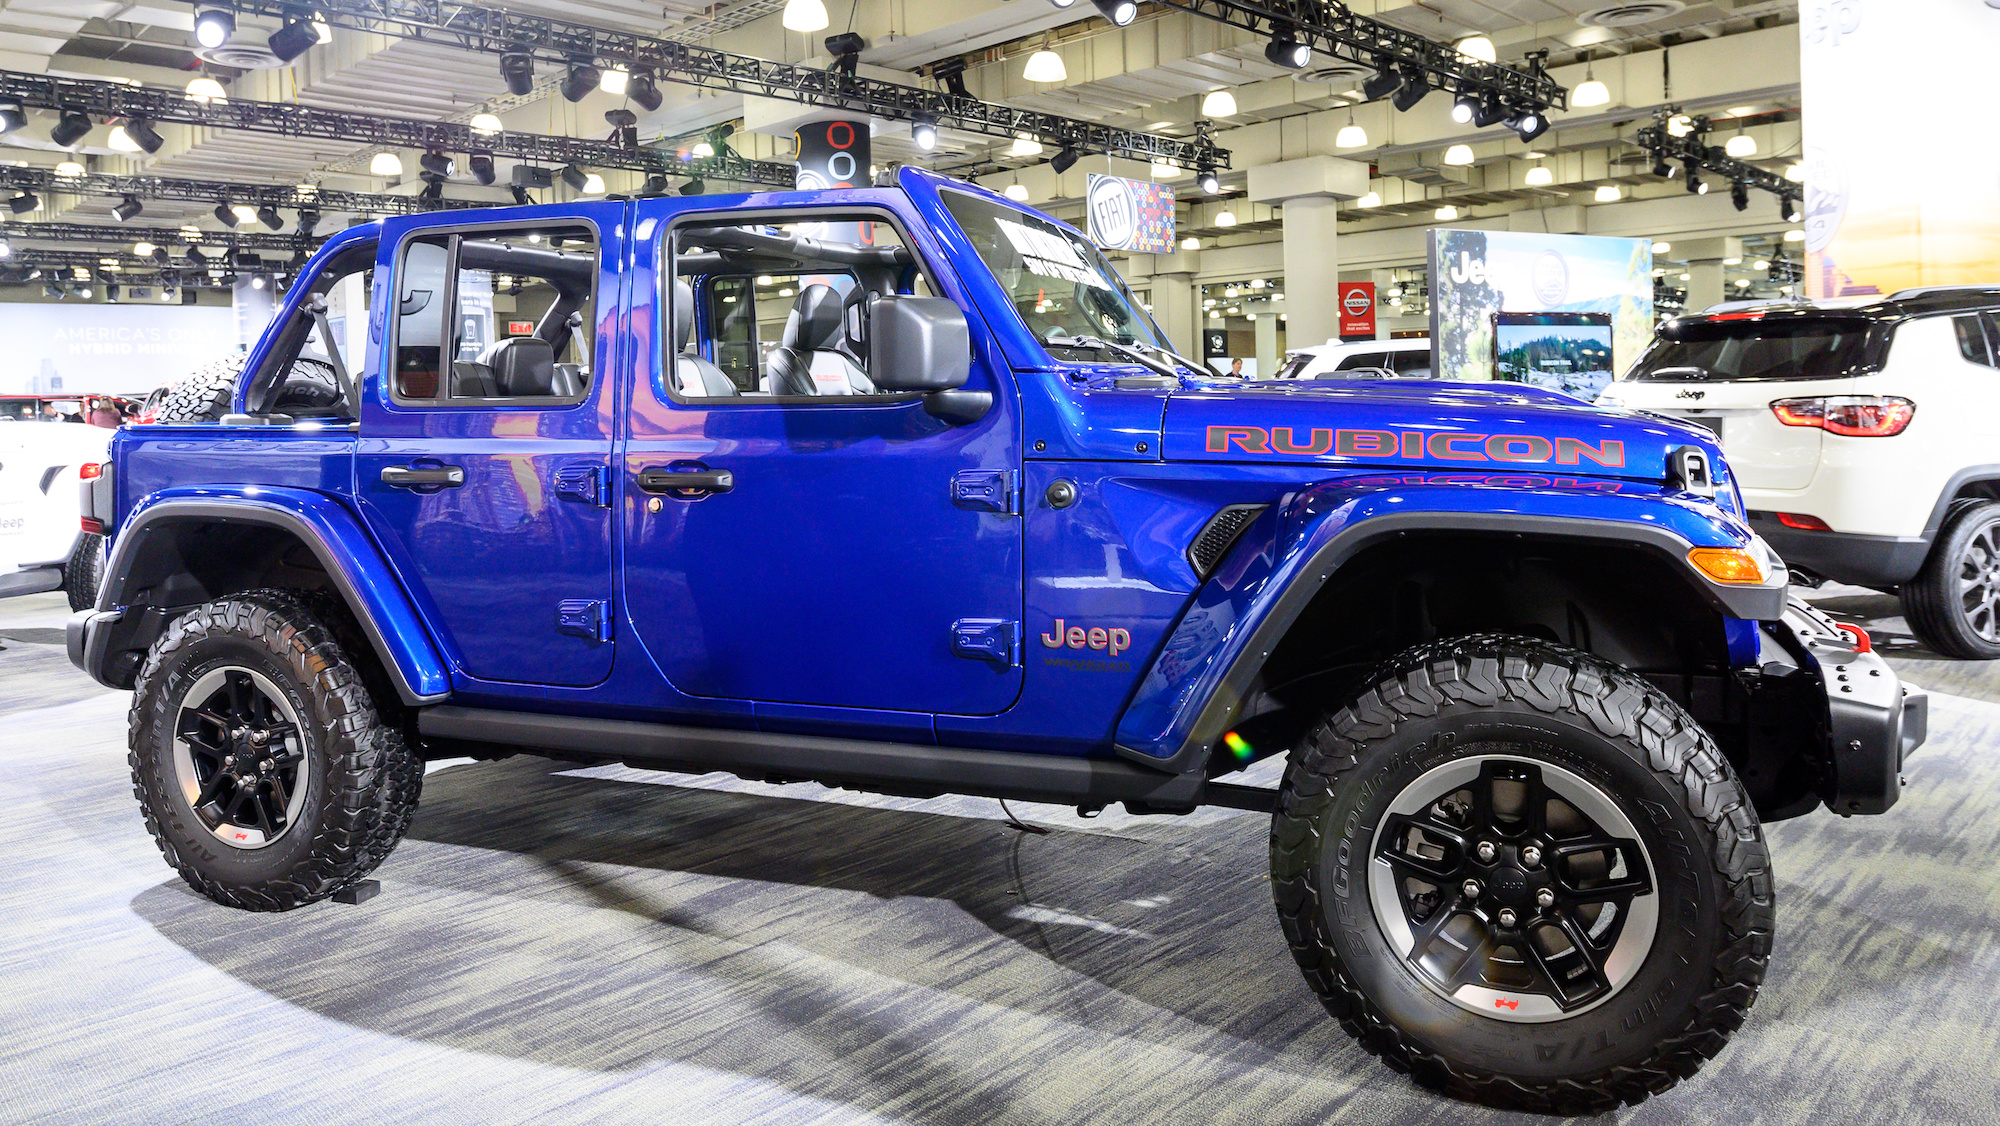 Jeep Gladiator Rubicon seen at the New York International Auto Show at the Jacob K. Javits Convention Center